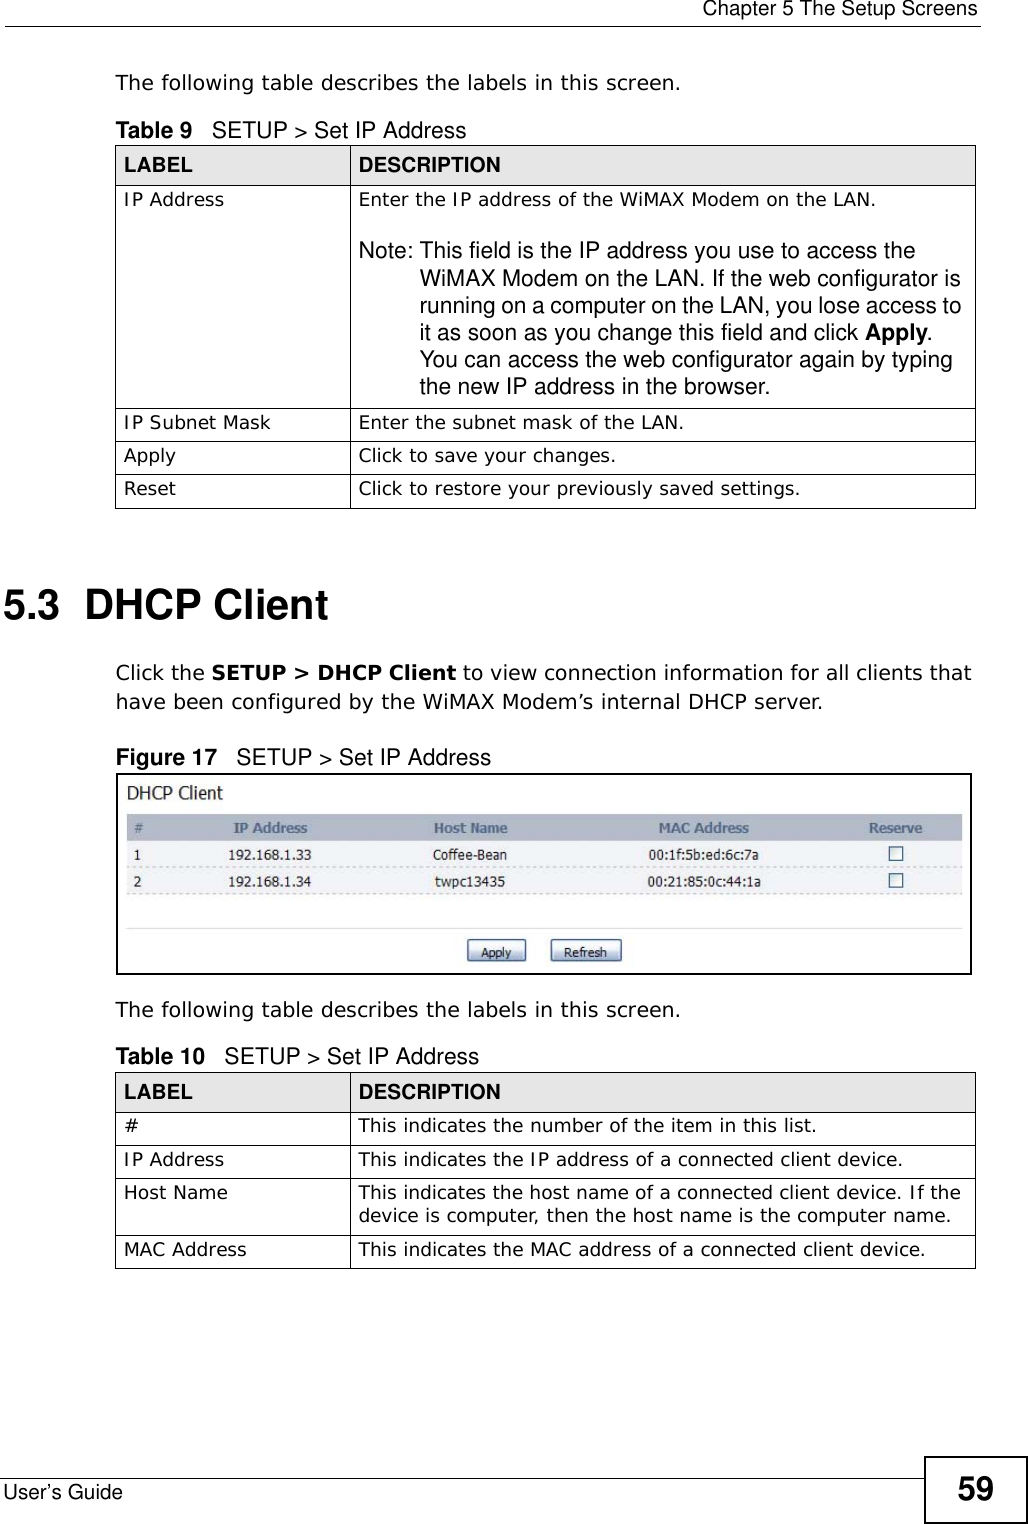  Chapter 5 The Setup ScreensUser’s Guide 59The following table describes the labels in this screen.  5.3  DHCP ClientClick the SETUP &gt; DHCP Client to view connection information for all clients that have been configured by the WiMAX Modem’s internal DHCP server.Figure 17   SETUP &gt; Set IP AddressThe following table describes the labels in this screen.  Table 9   SETUP &gt; Set IP AddressLABEL DESCRIPTIONIP Address Enter the IP address of the WiMAX Modem on the LAN.Note: This field is the IP address you use to access the WiMAX Modem on the LAN. If the web configurator is running on a computer on the LAN, you lose access to it as soon as you change this field and click Apply. You can access the web configurator again by typing the new IP address in the browser.IP Subnet Mask Enter the subnet mask of the LAN.Apply Click to save your changes.Reset Click to restore your previously saved settings.Table 10   SETUP &gt; Set IP AddressLABEL DESCRIPTION# This indicates the number of the item in this list.IP Address This indicates the IP address of a connected client device.Host Name This indicates the host name of a connected client device. If the device is computer, then the host name is the computer name.MAC Address This indicates the MAC address of a connected client device.